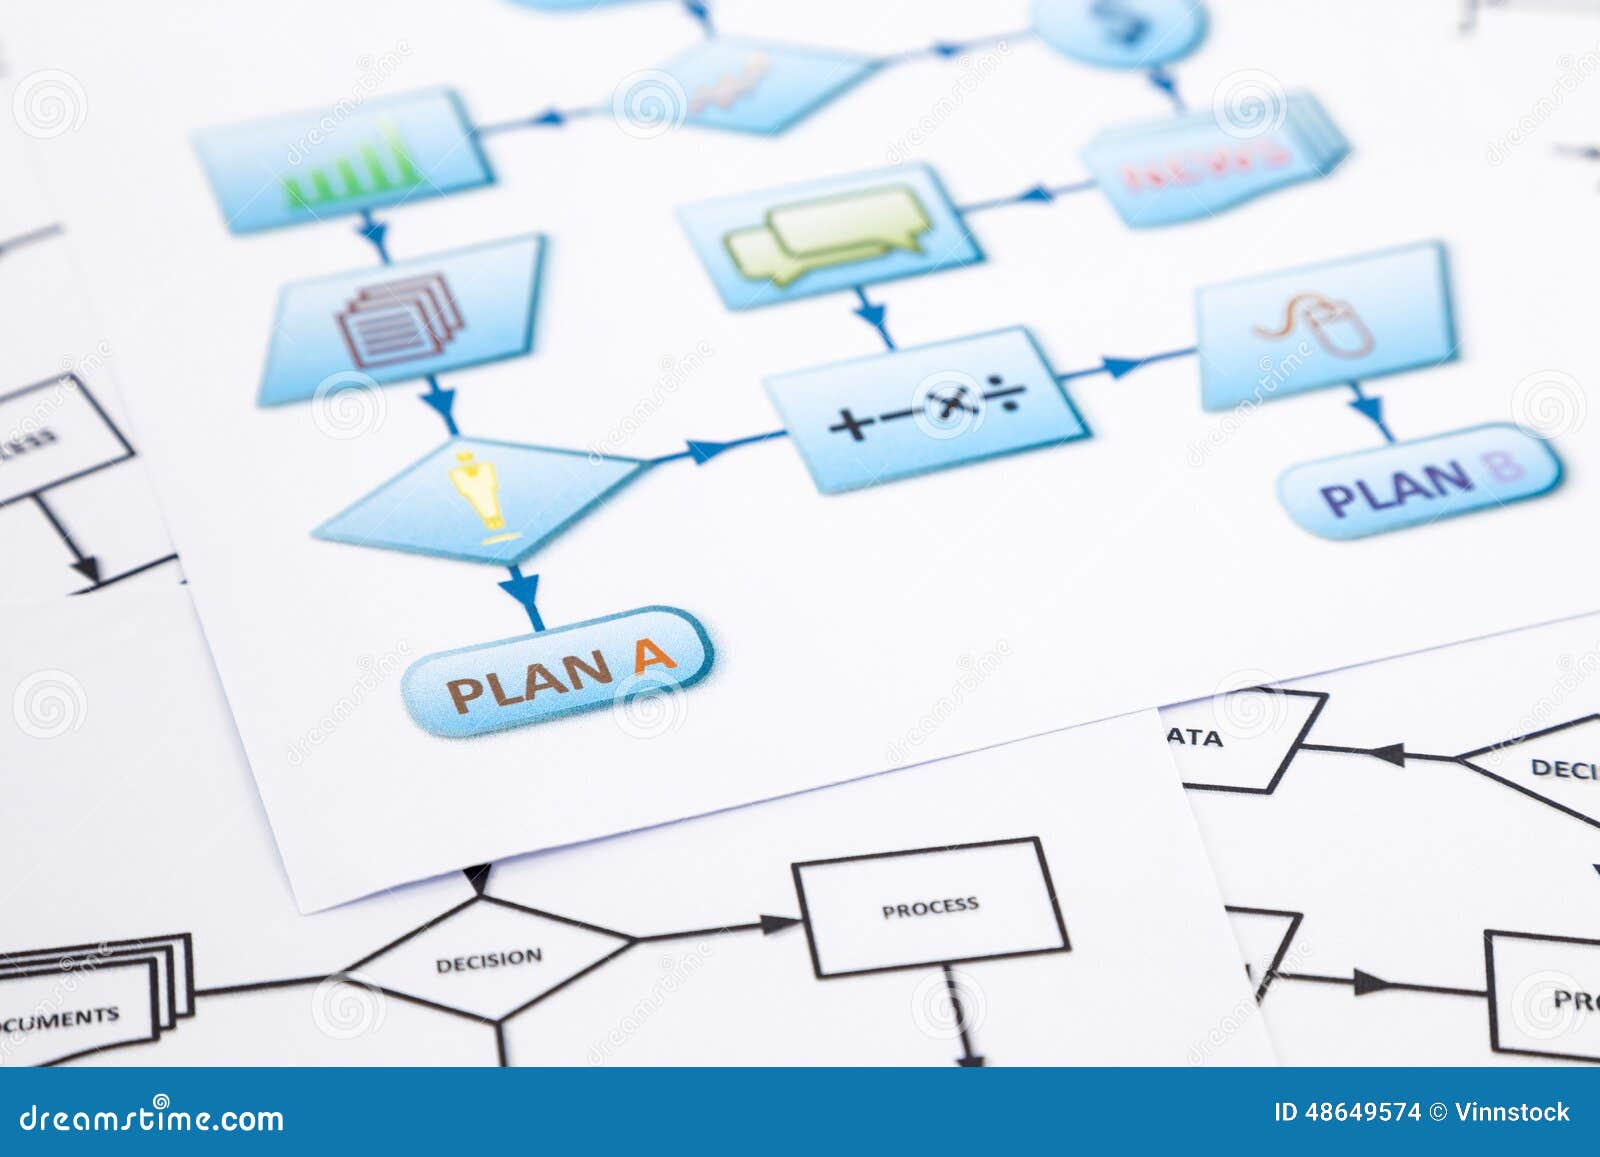 Business process mapping